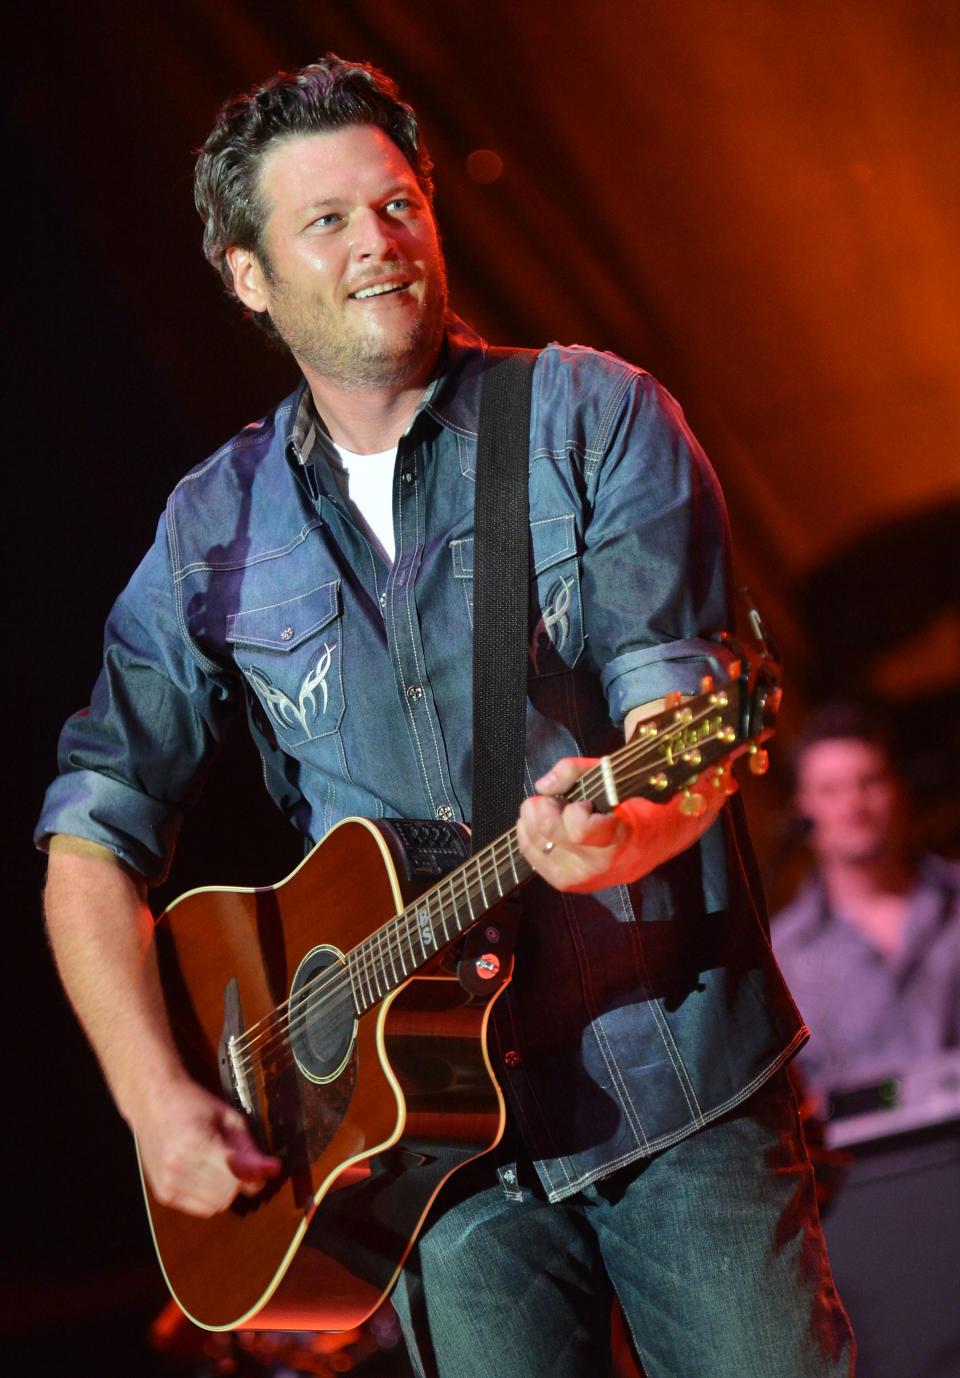 Blake Shelton -- Male Vocalist of the Year Nominee, Entertainer of the Year Nominee <br><p> Singer/Songwriter Blake Shelton performs at Country Thunder - Day 3 on July 21, 2012 in Twin Lakes, Wisconsin. (Photo by Rick Diamond/Getty Images for Country Thunder)</p>